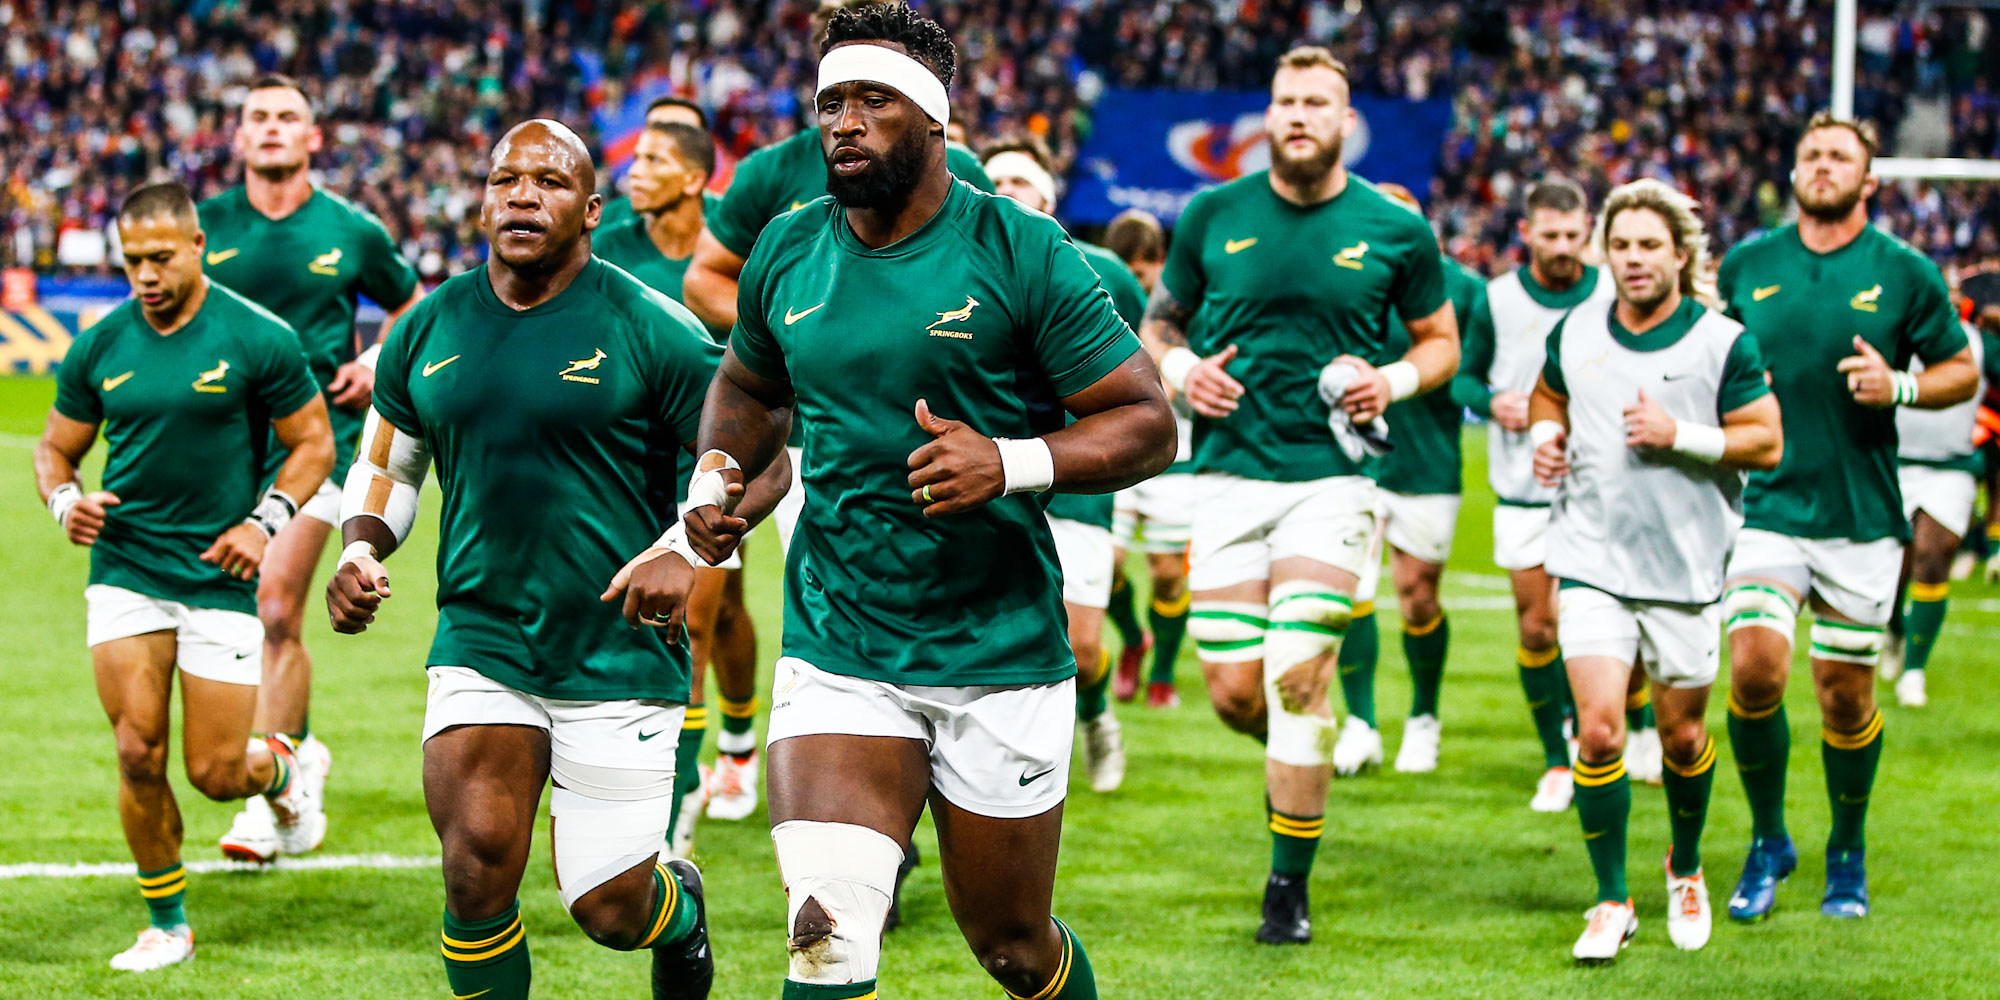 Siya Kolisi leads the Boks off the field after the warm-up before their RWC quarter-final against France.